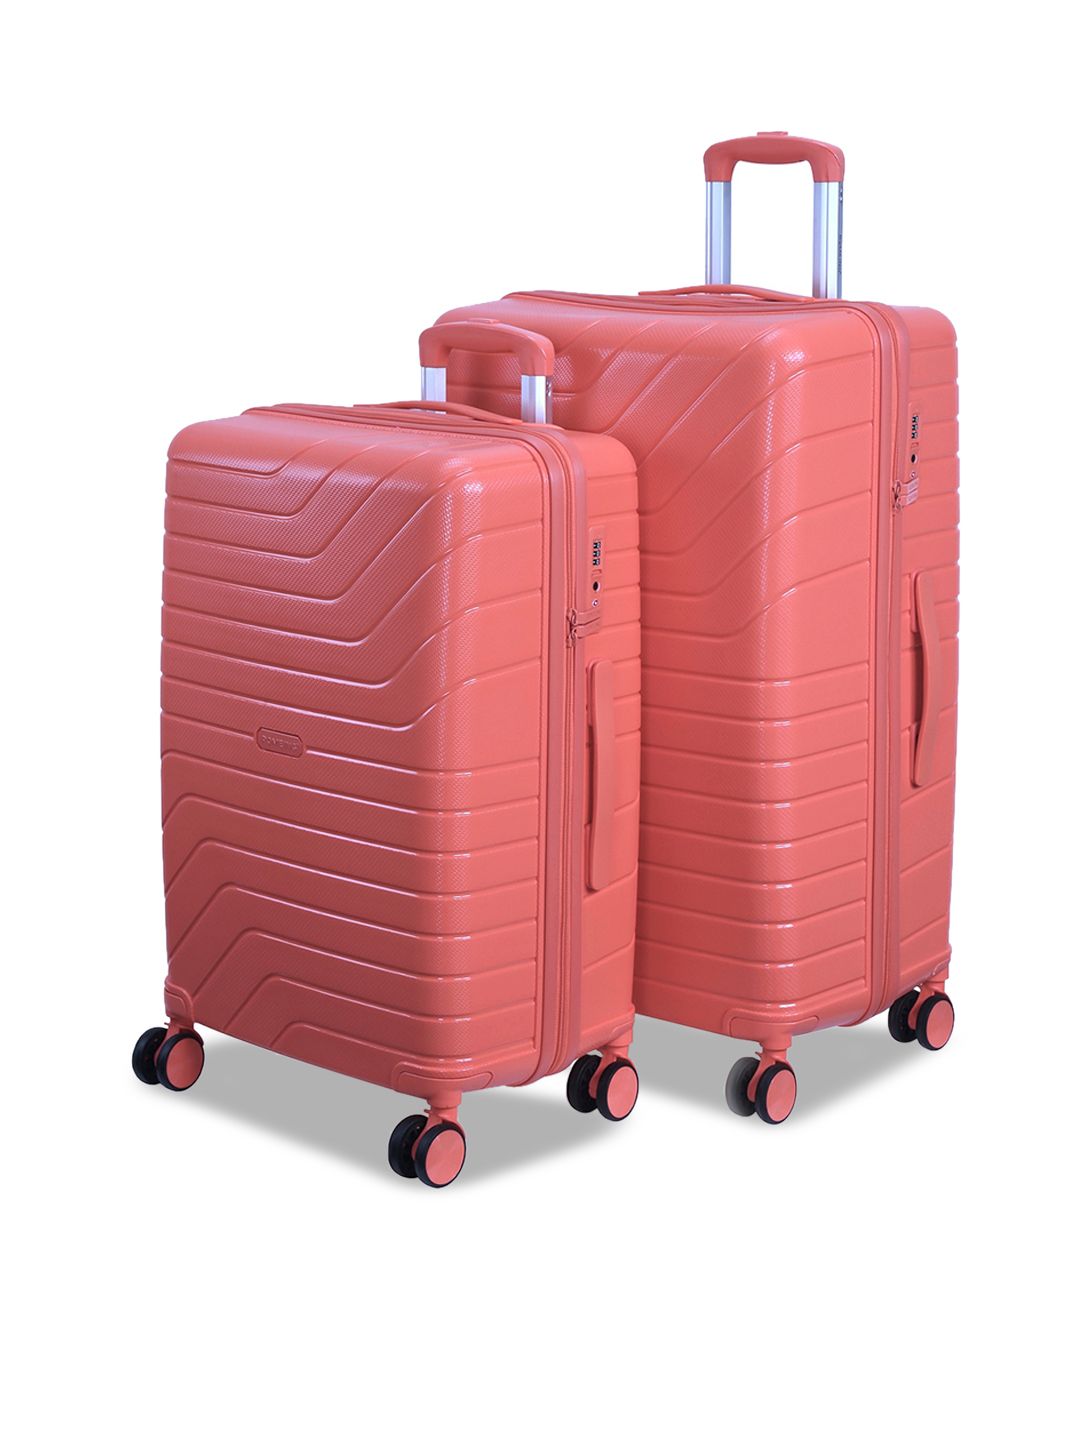 ROMEING Tuscany Set of 2 Coral Red-Colored Textured Hard Sided Polypropylene Trolley Bag Price in India